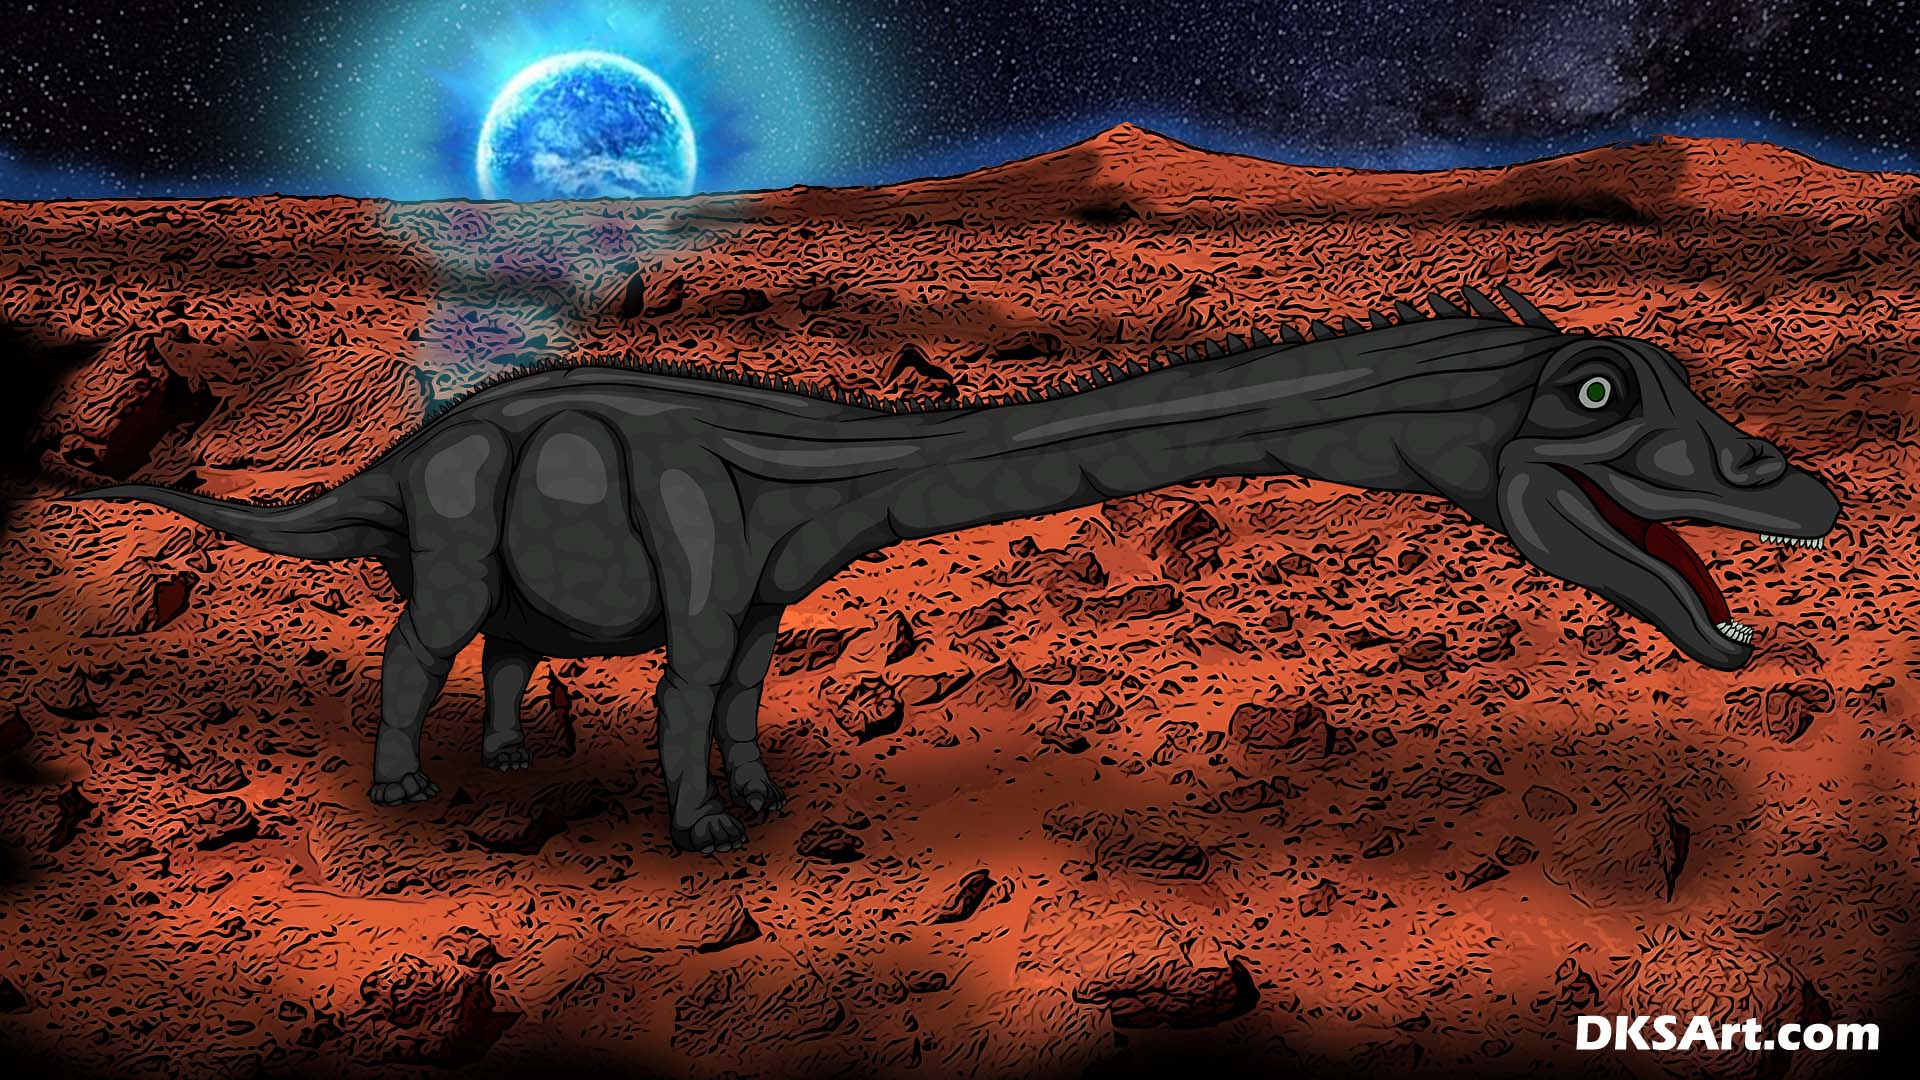 Diplodocus Standing On Planet Mars Digital Artwork Drawing intérieur How To Draw A Diplodocus 